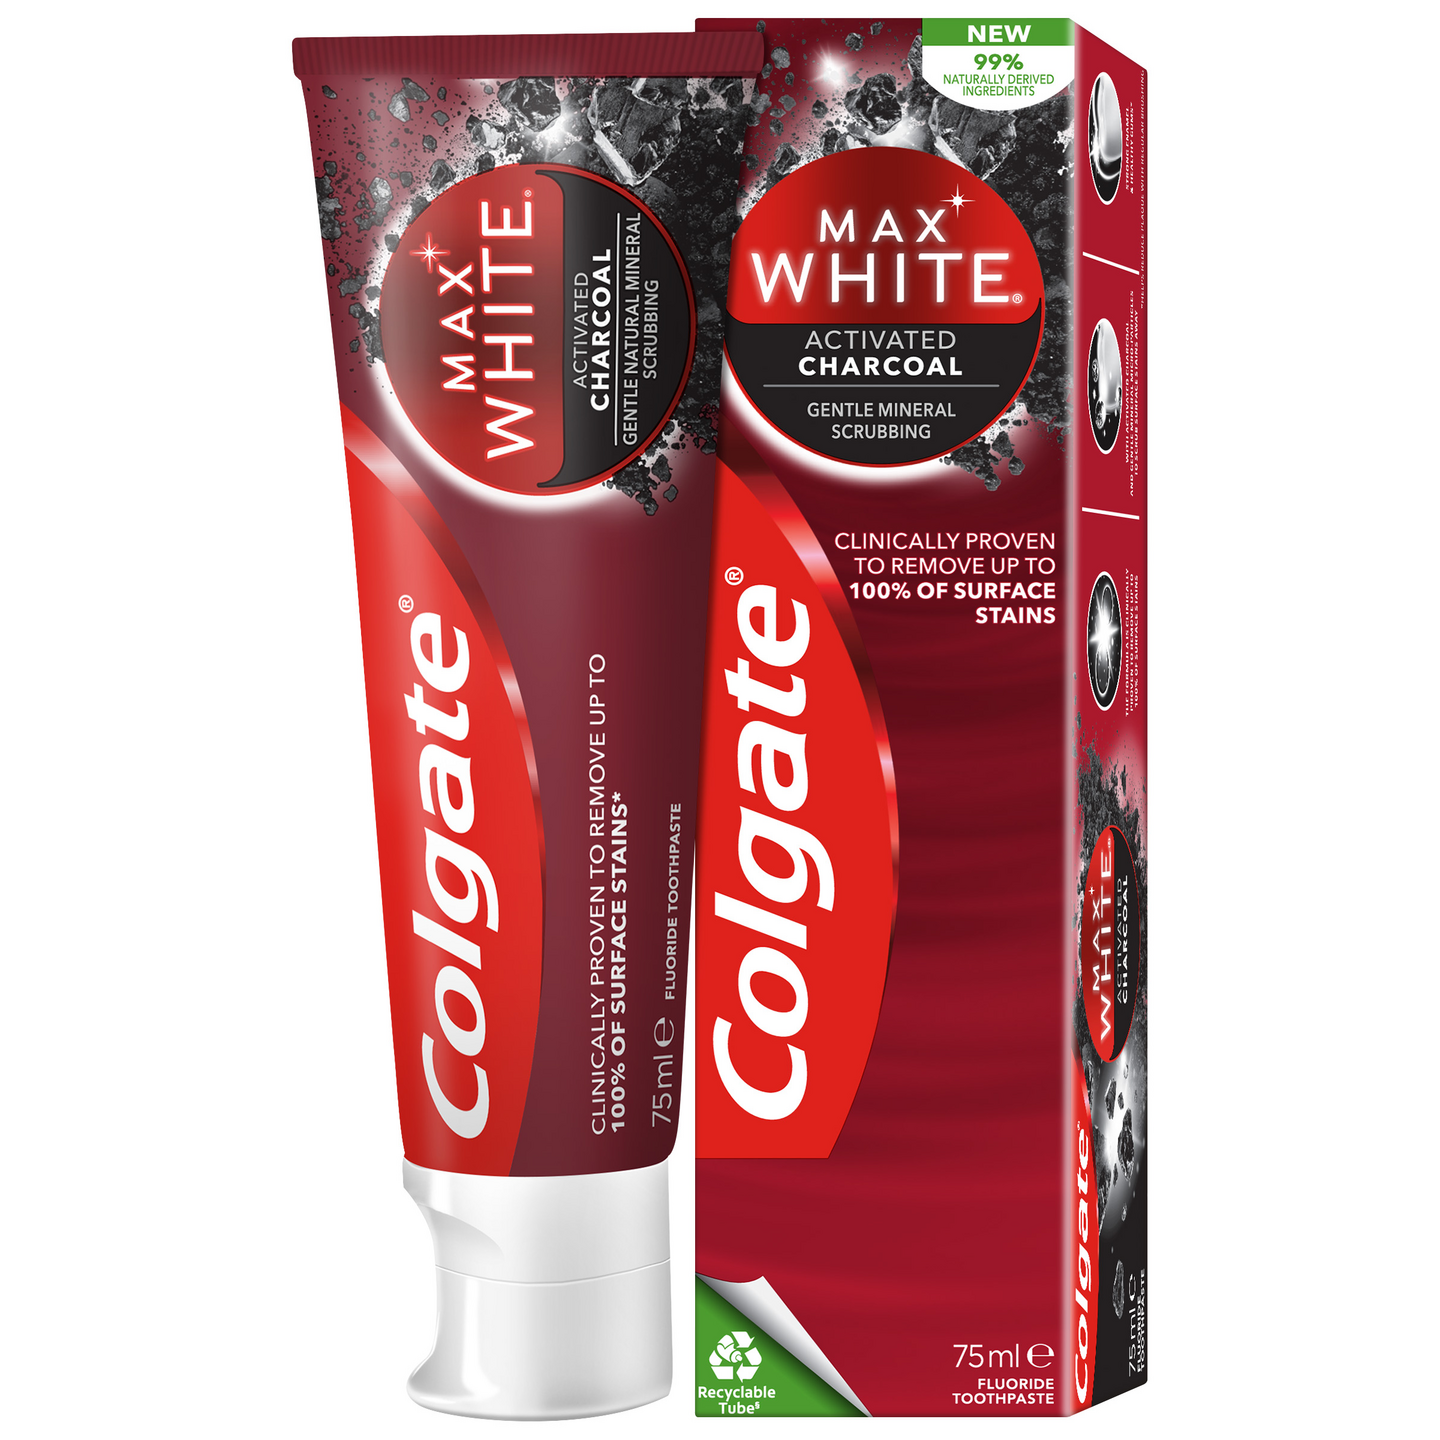 Colgate Max White Charcoal Whitening Toothpaste